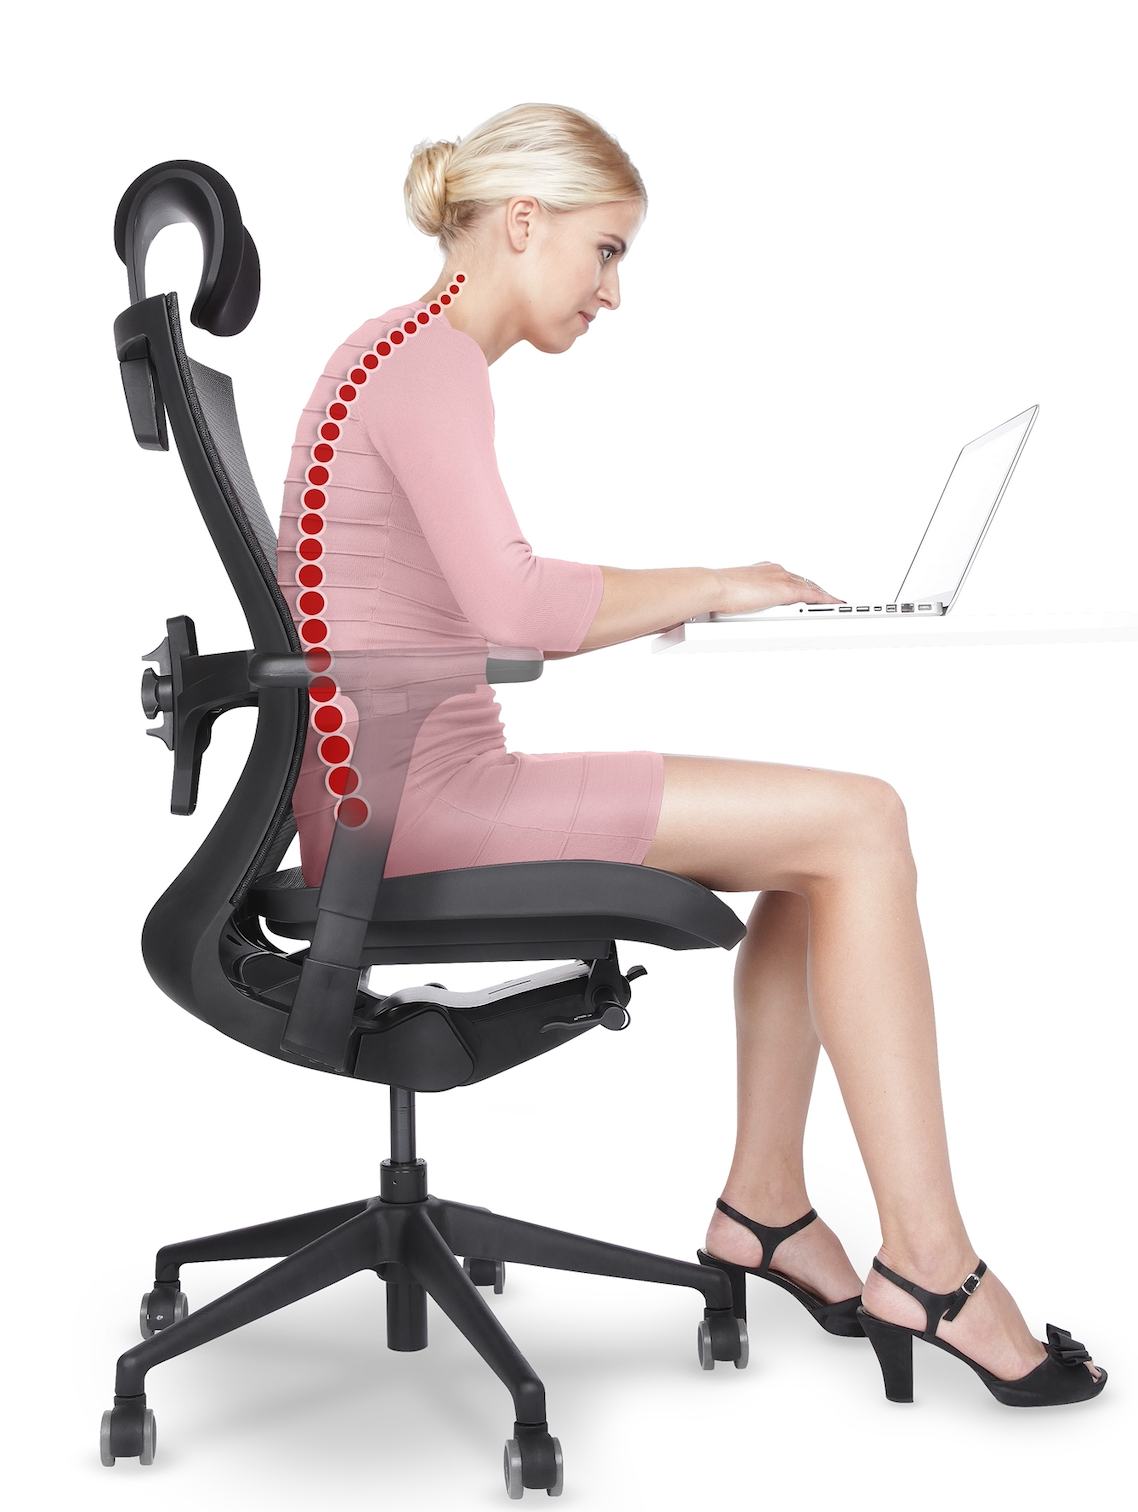 Person sitting in ergonomic office chair with headrest with haunched body posture